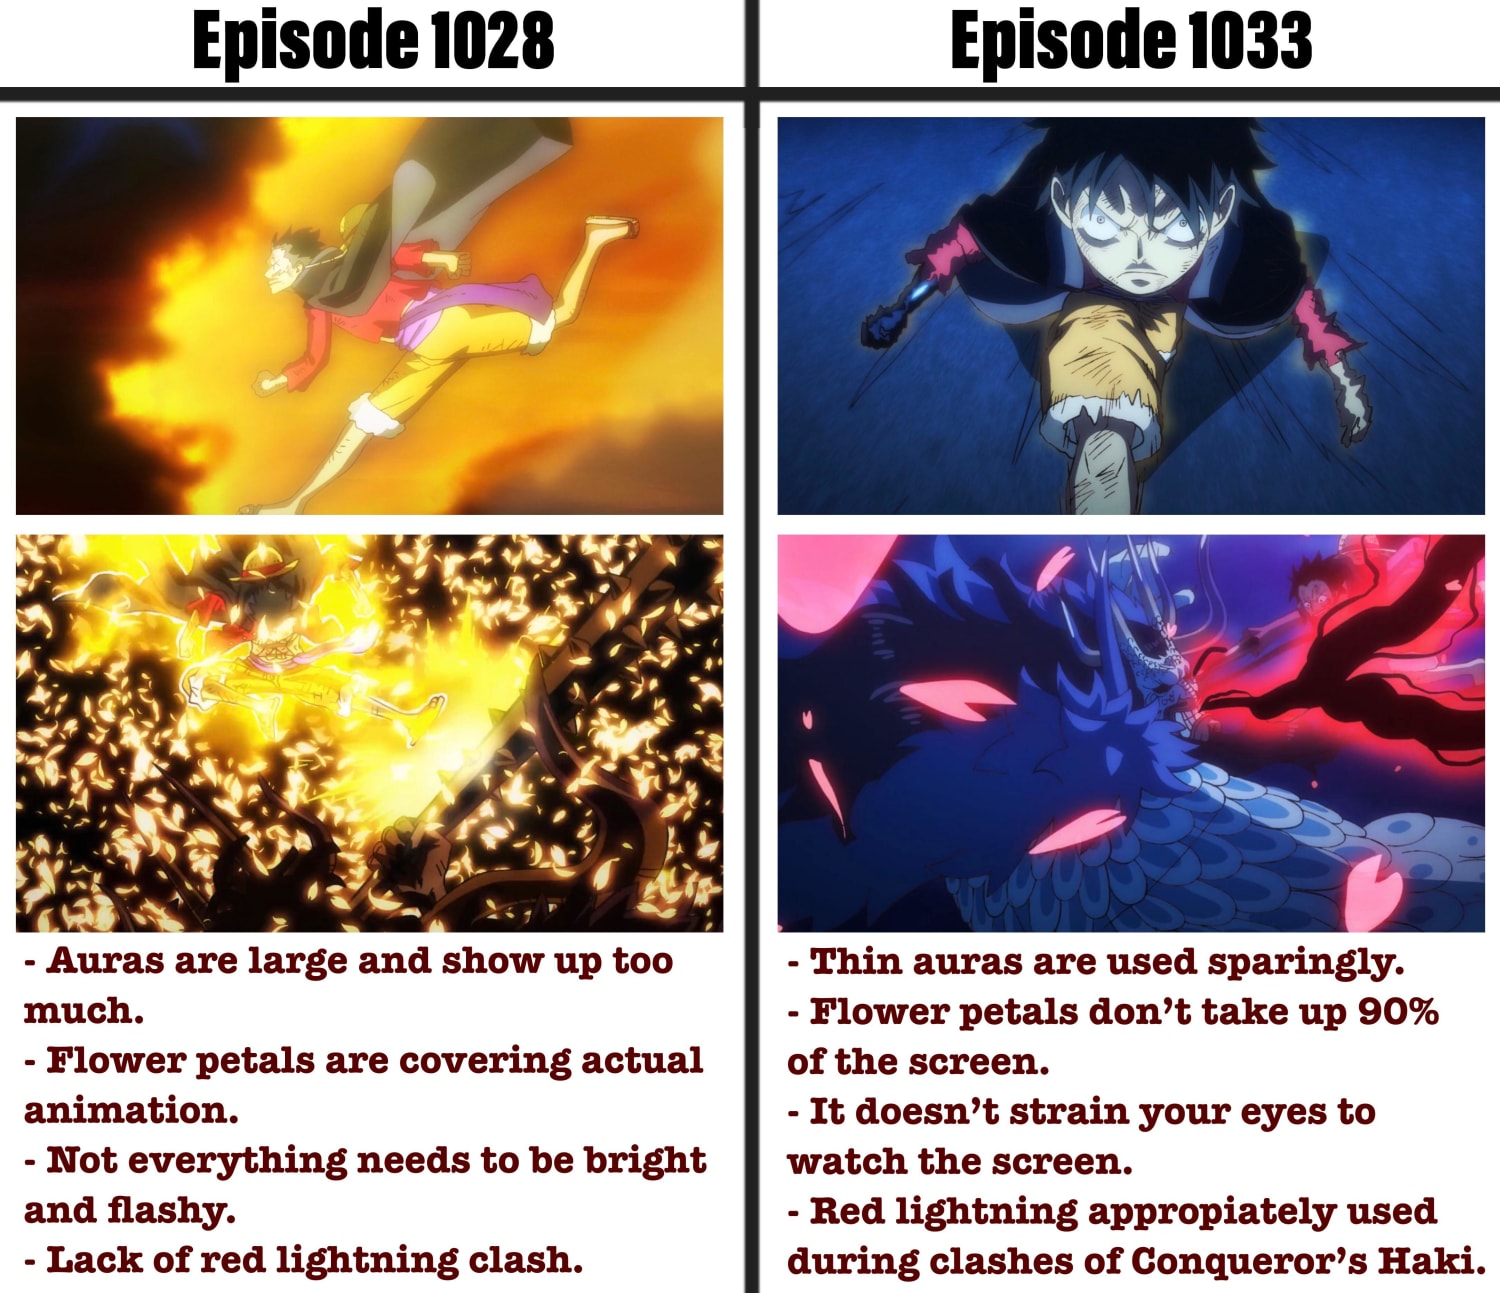 Thank You Toei: Visually Comparing Episode 1028 with Episode 1033